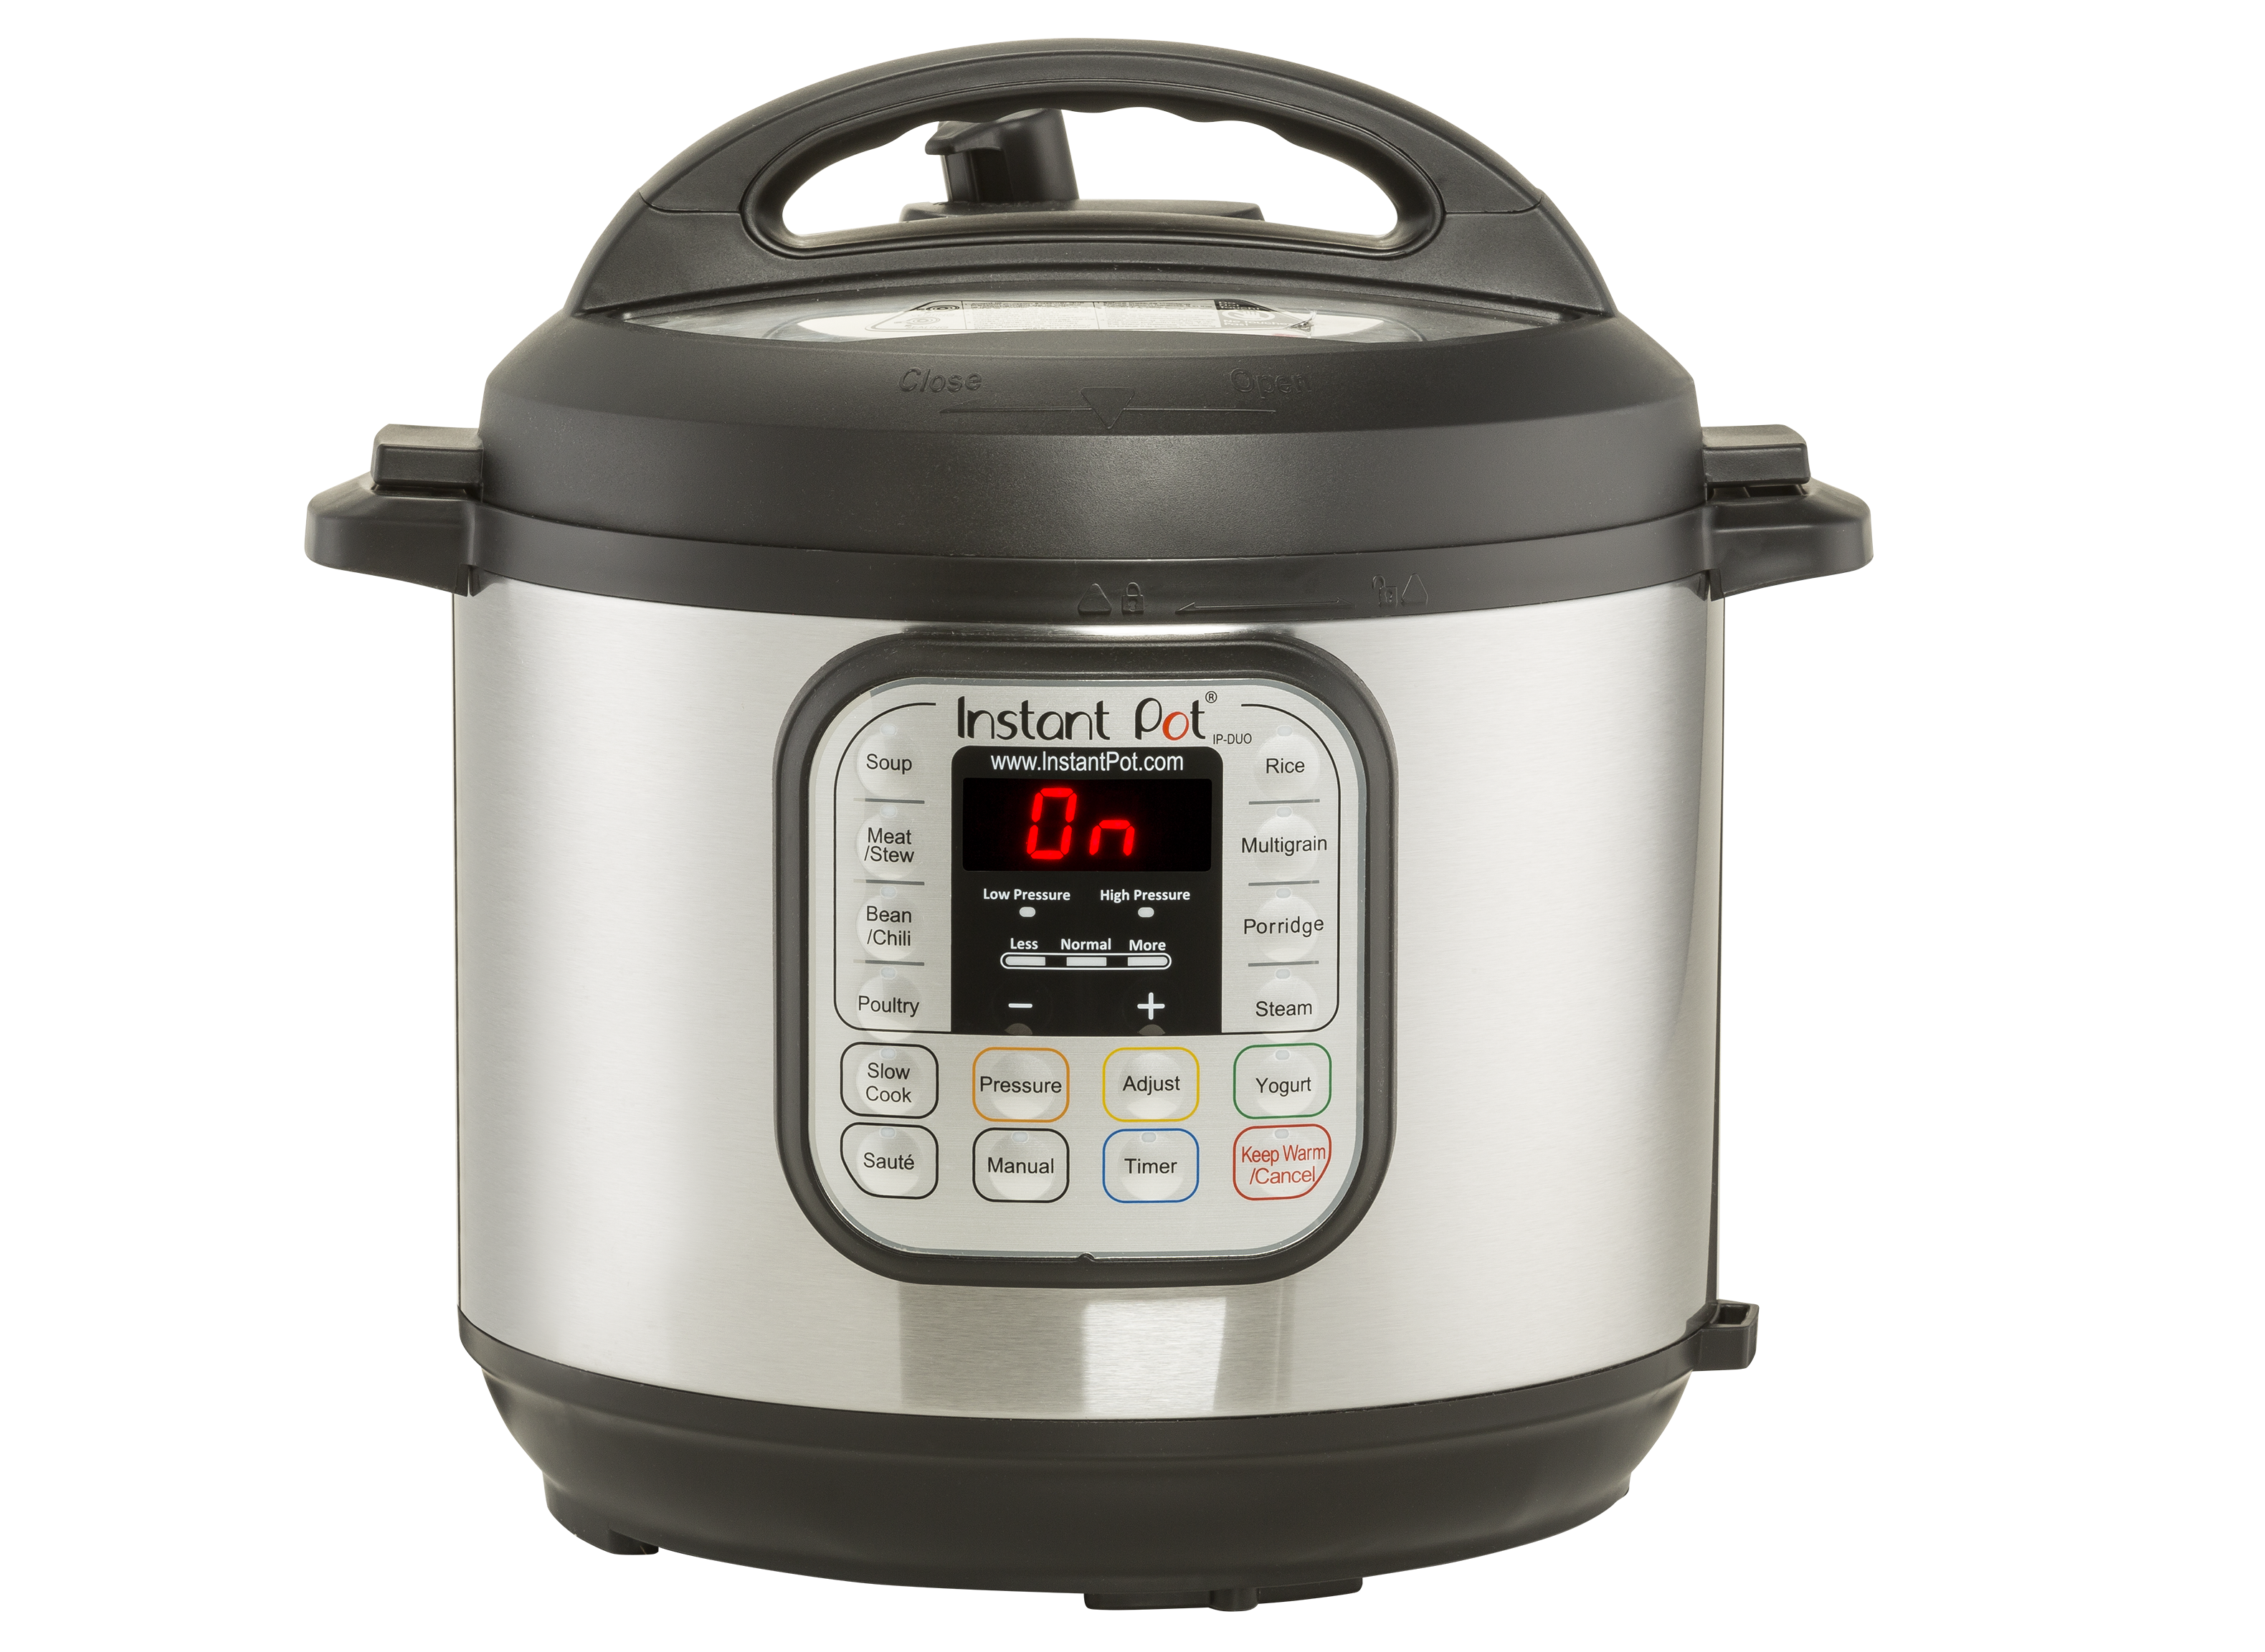 https://crdms.images.consumerreports.org/prod/products/cr/models/393022-slowcookers-instantpot-7in16quart.png